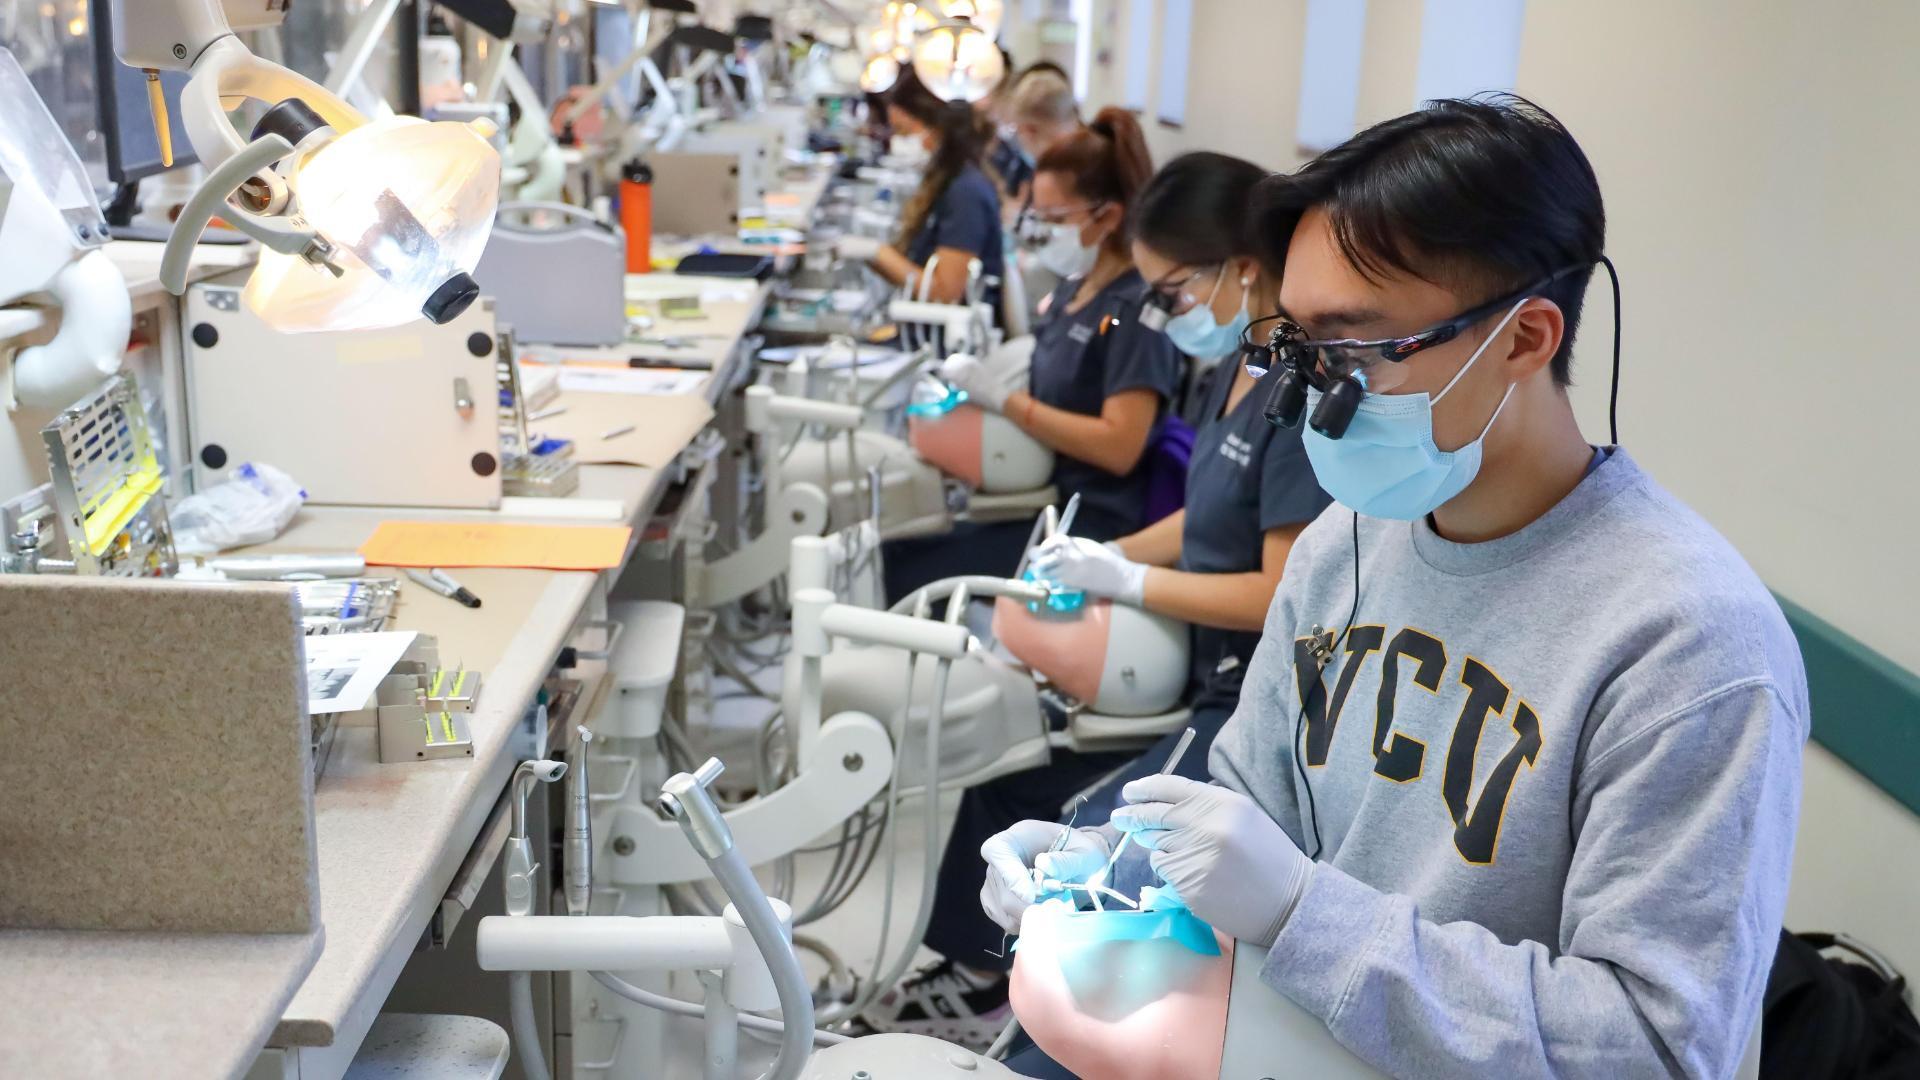 A photo of a row of dental students working on practice dummy heads